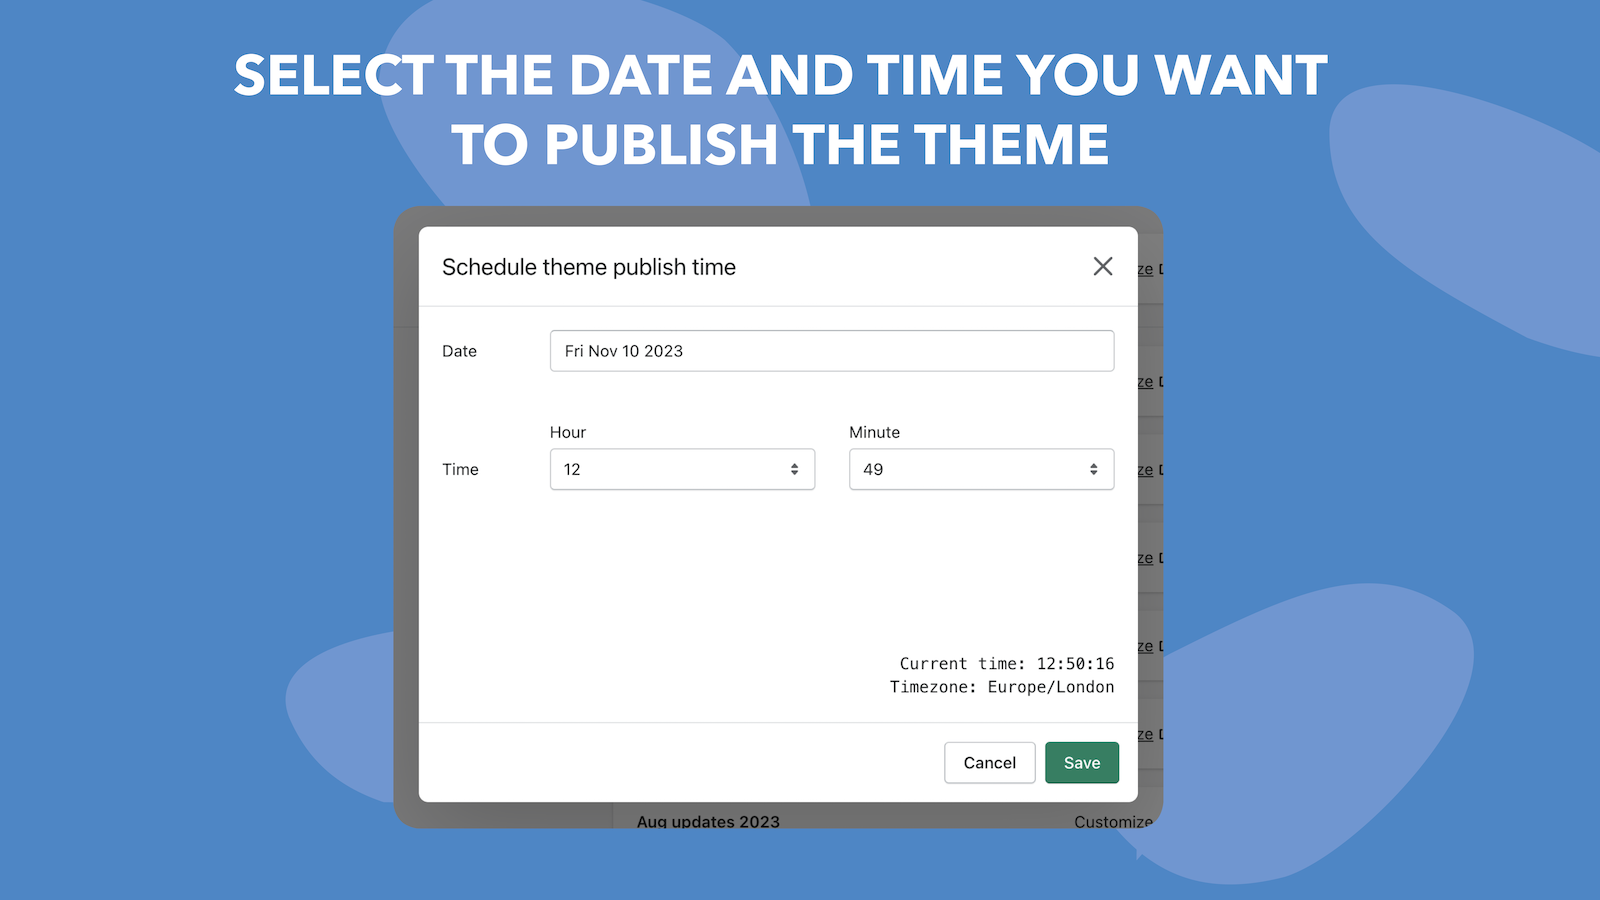 Select the date and time you want to publish the theme